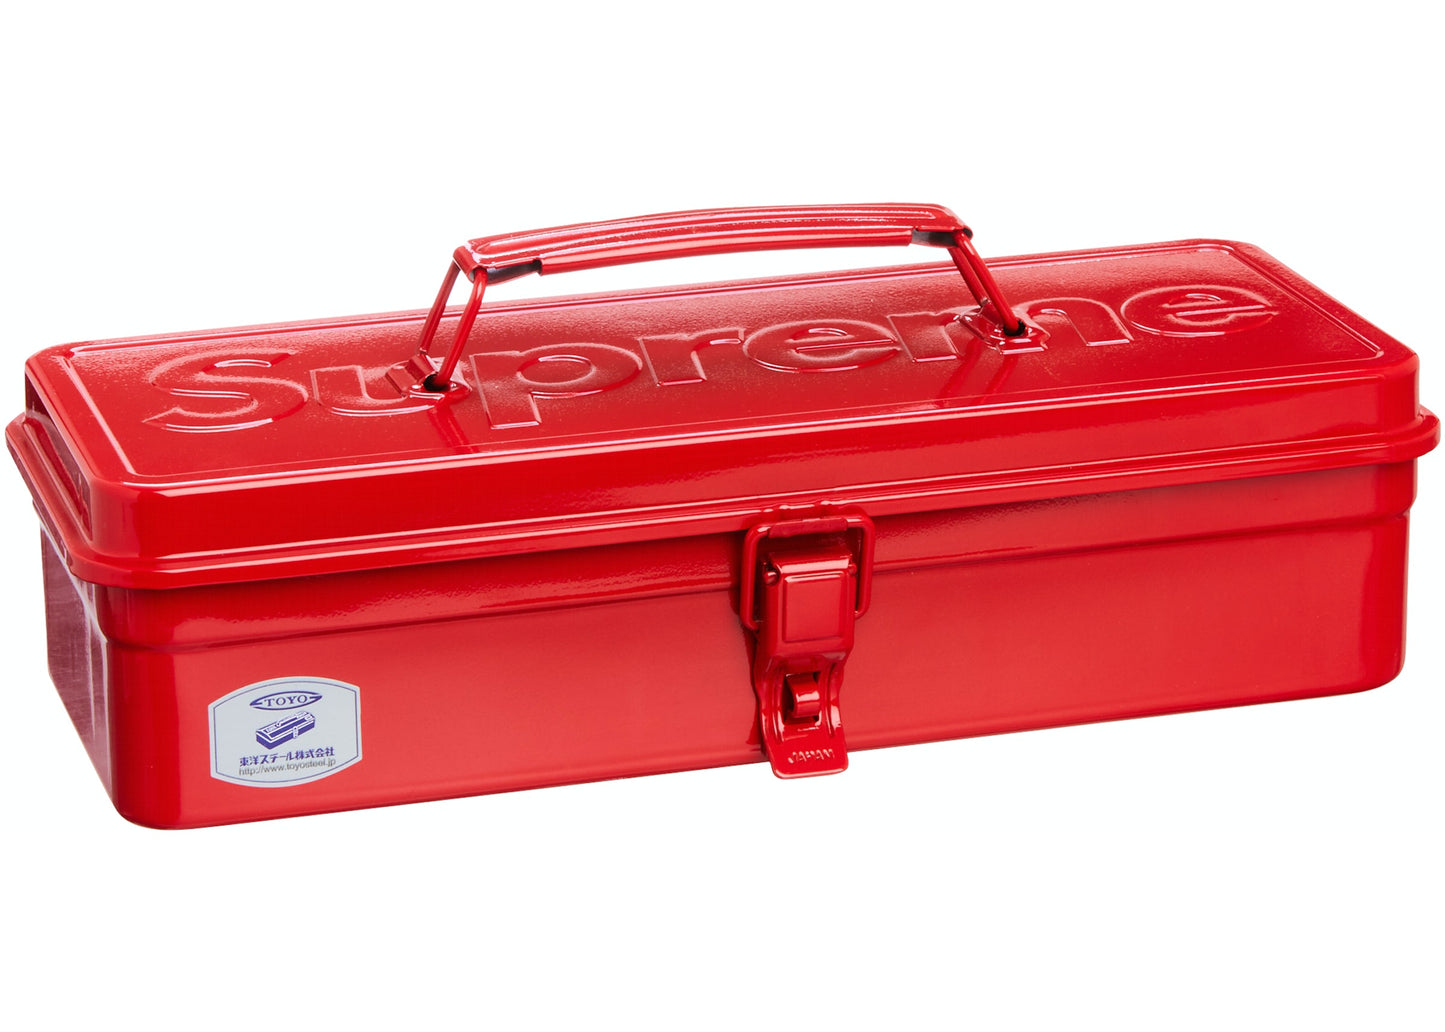 Supreme TOYO Steel T-320 Toolbox Red